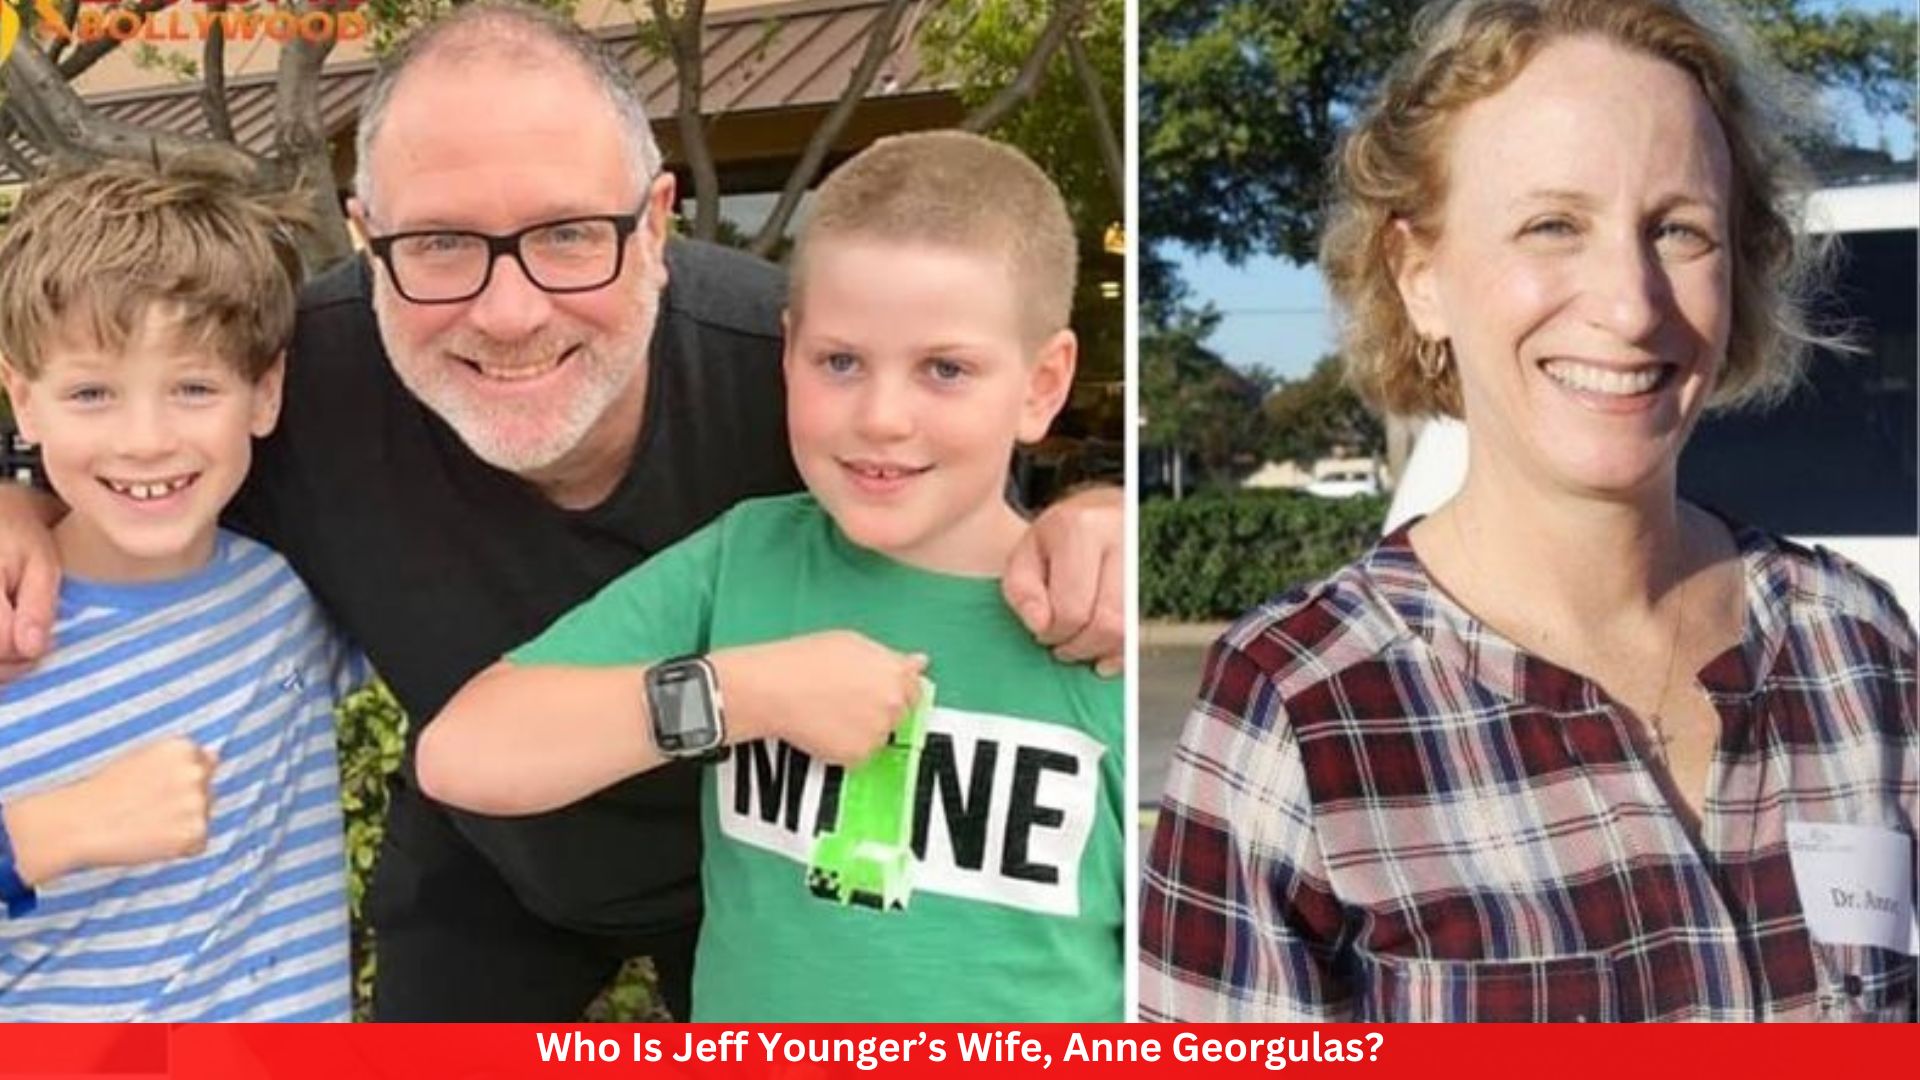 Who Is Jeff Younger’s Wife, Anne Georgulas?